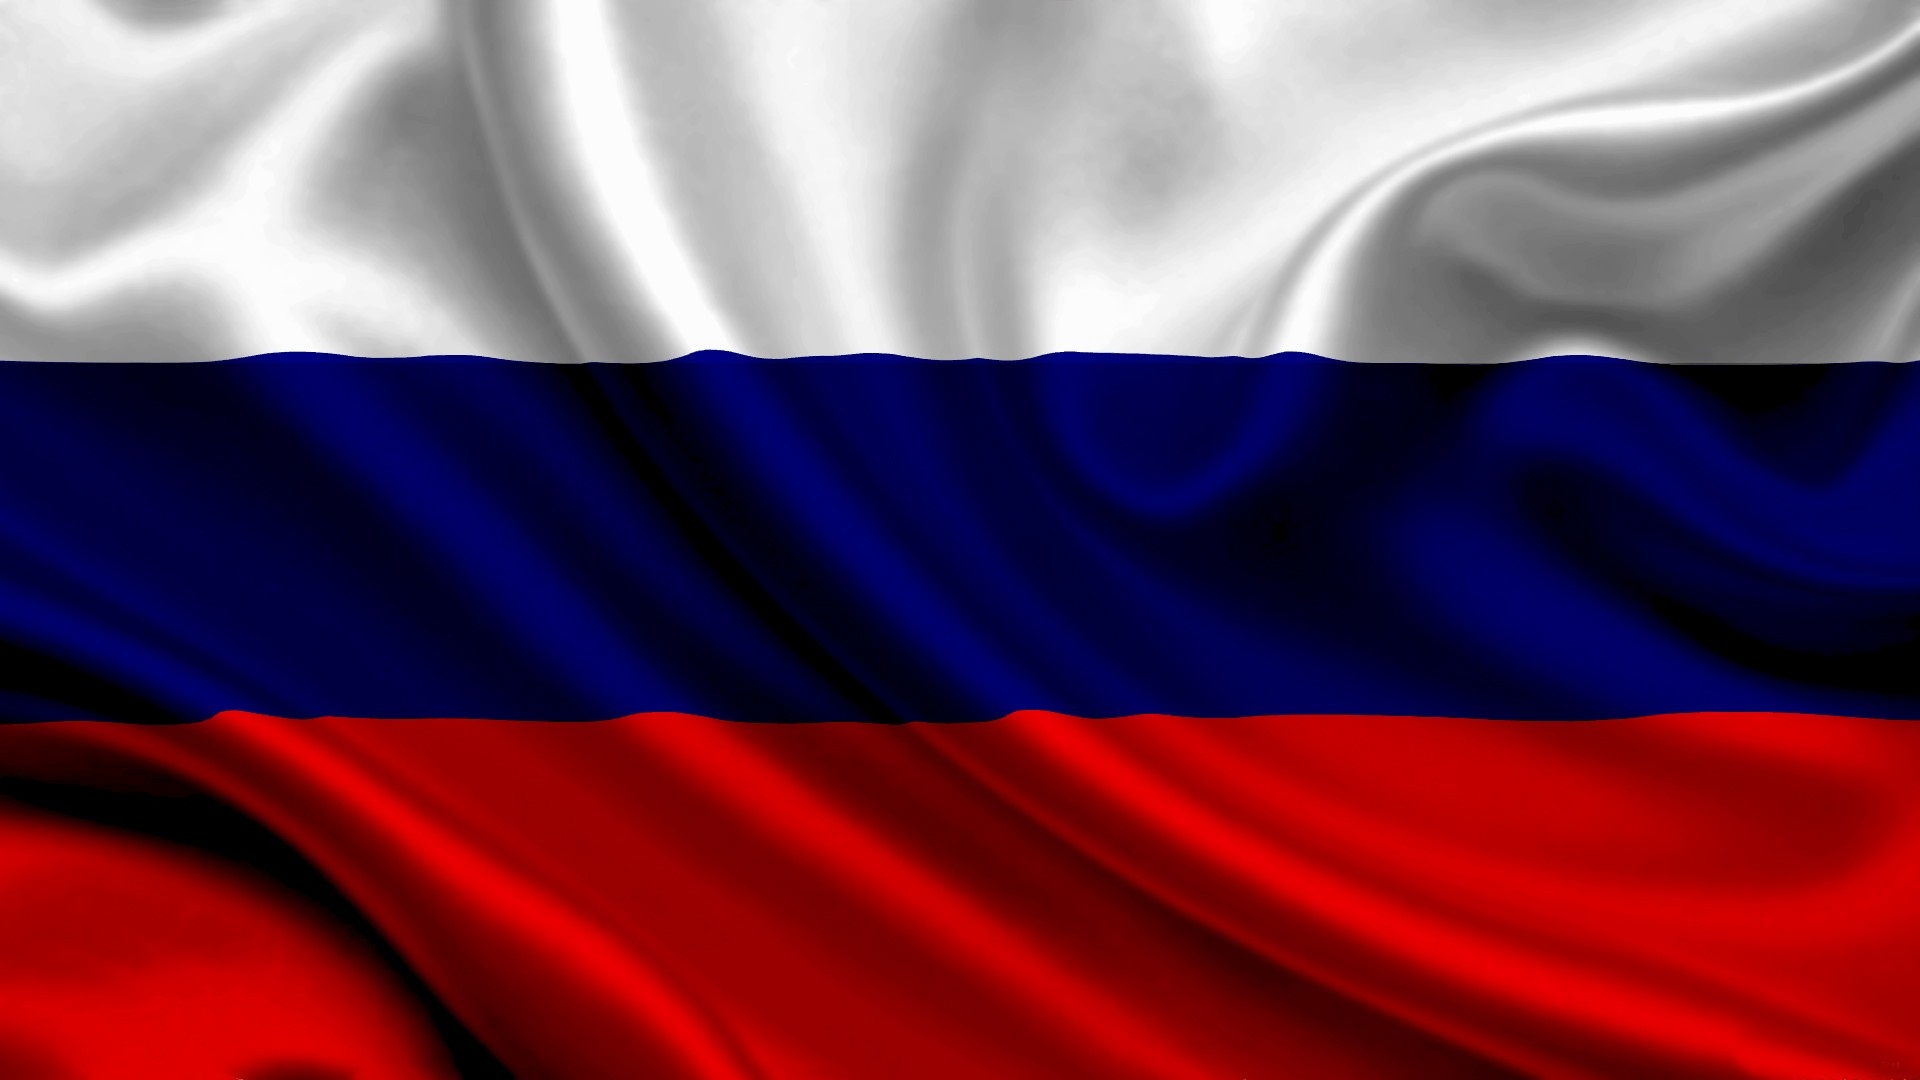 Russian Flag Wallpaper Image Gallery